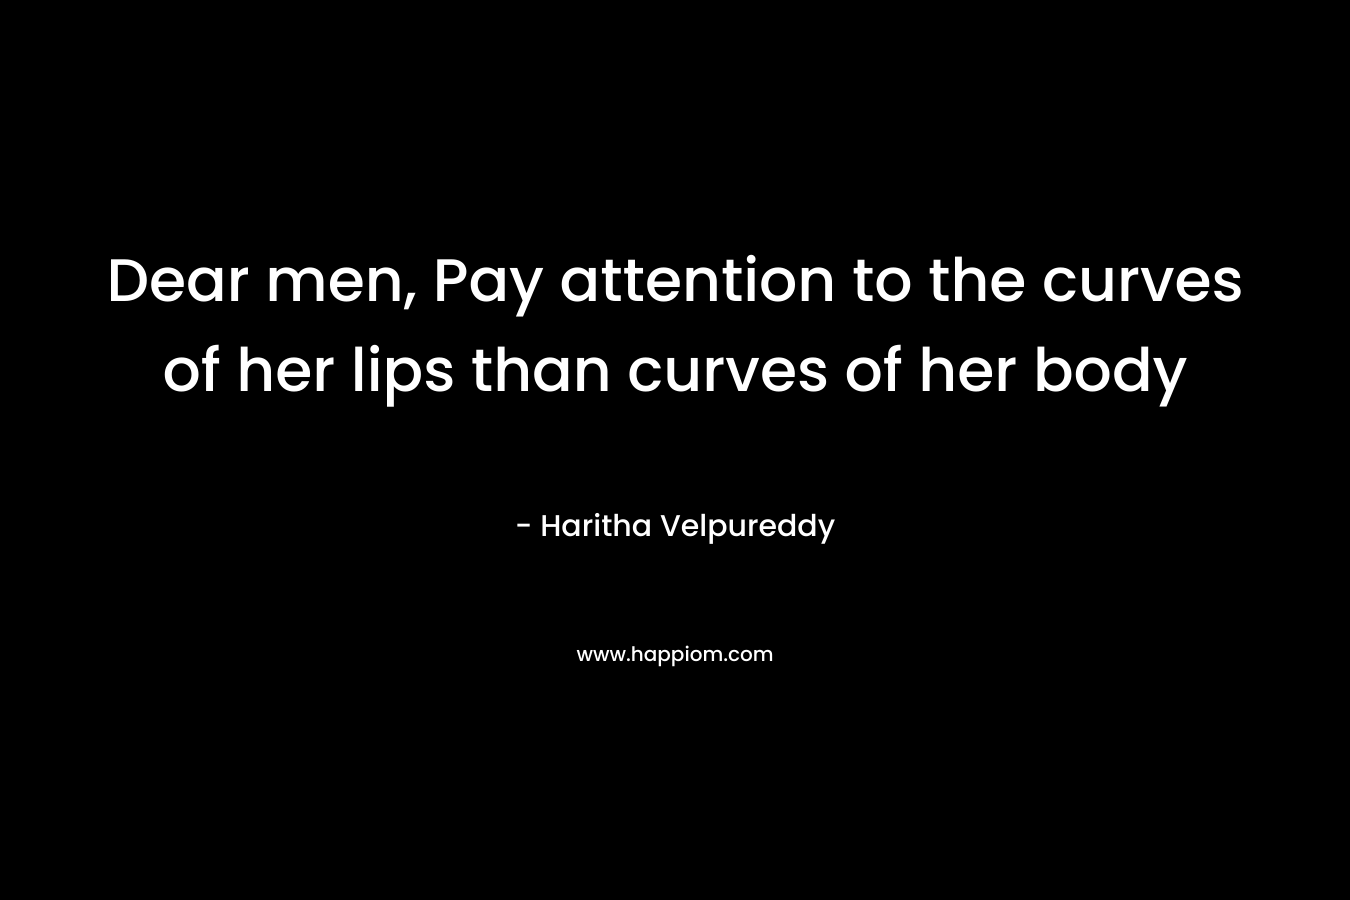 Dear men, Pay attention to the curves of her lips than curves of her body